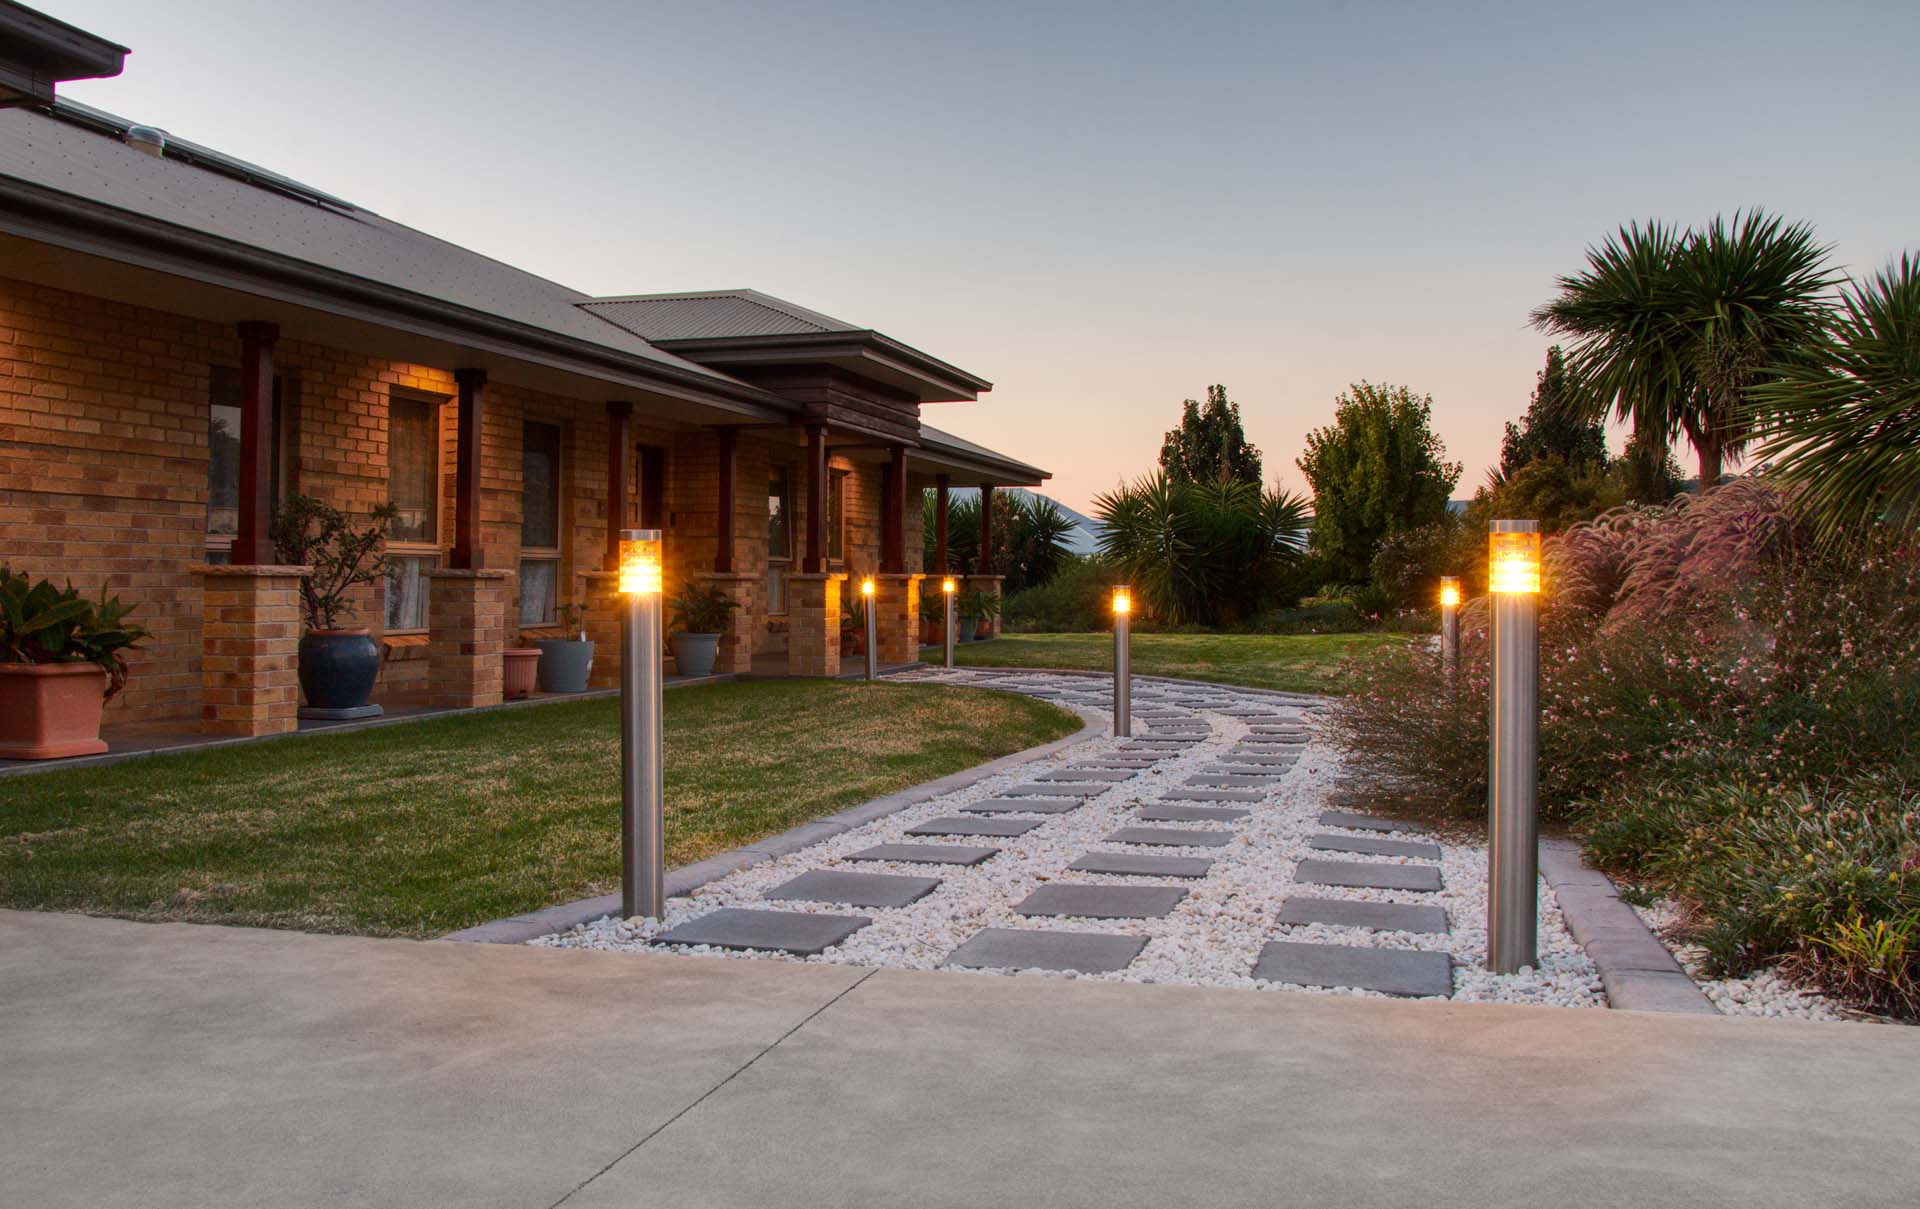 Paving in gray pebbles and bollard lights in North Tamworth NSW